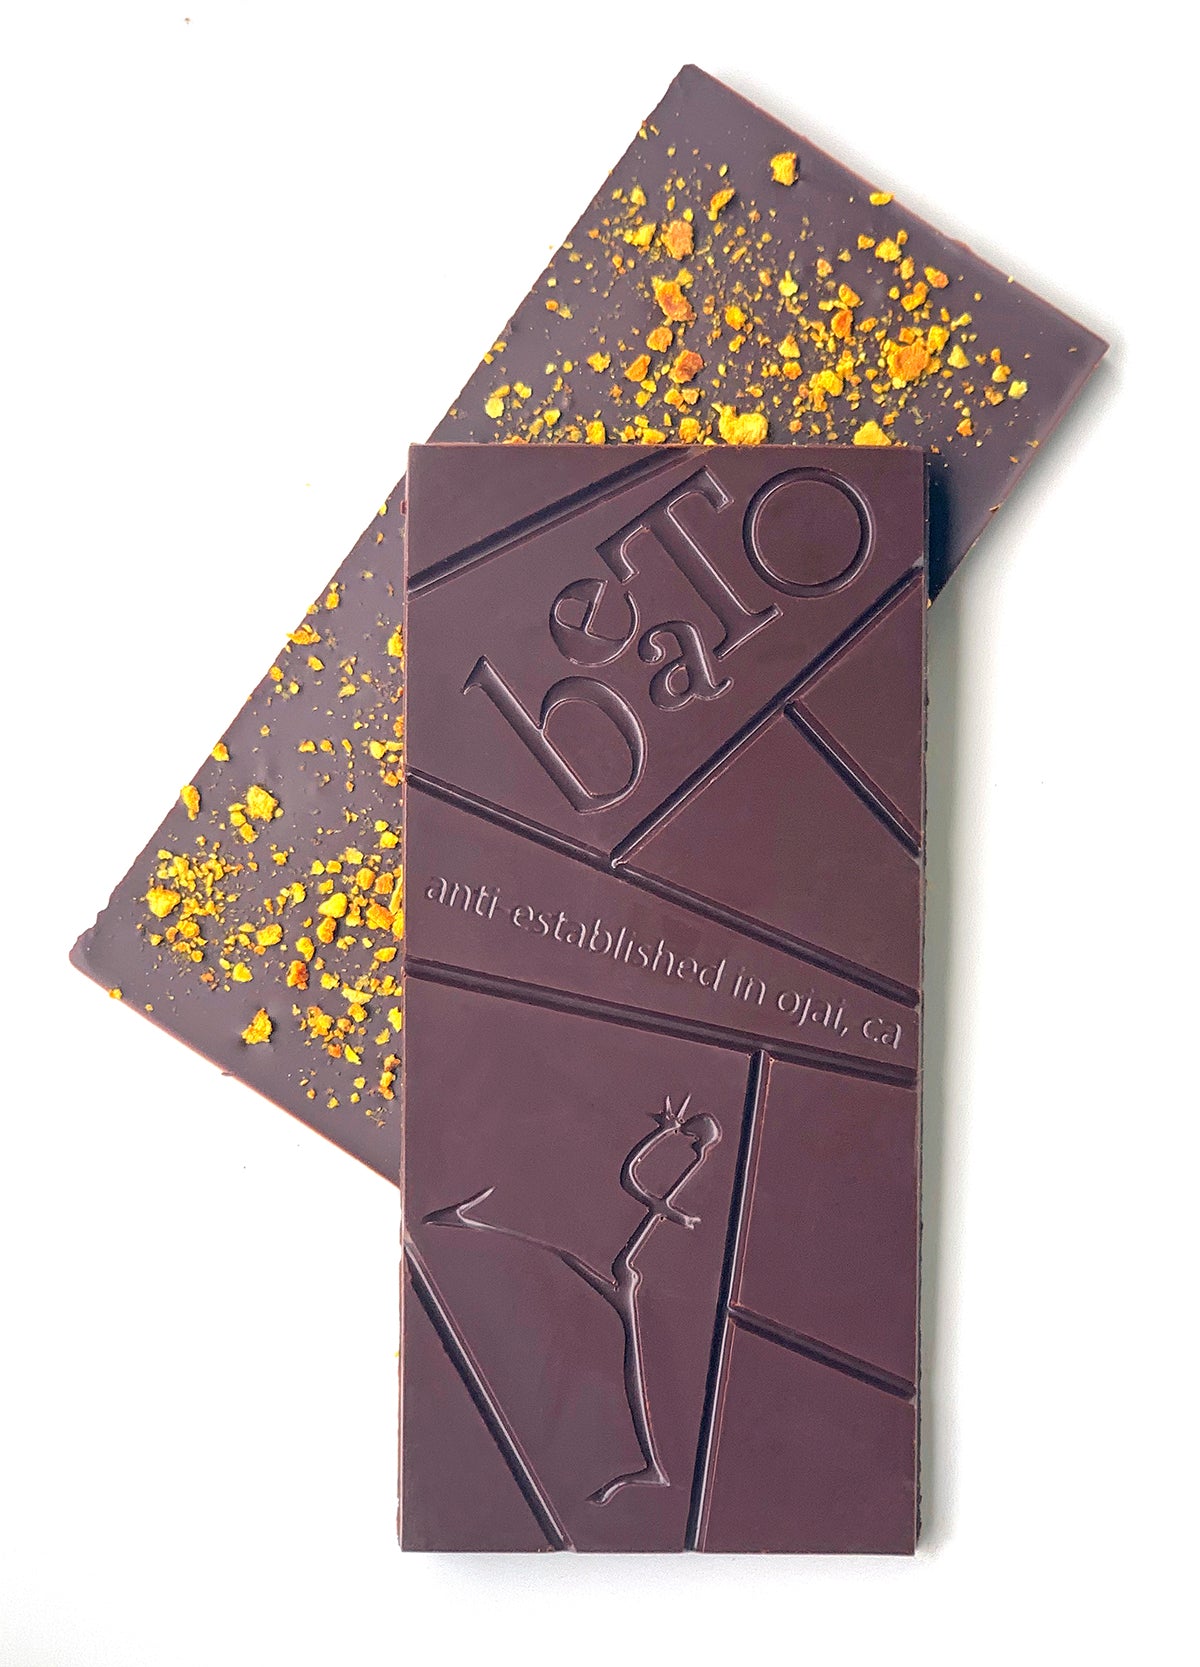 Flavors of gourmet dark chocolate infused with orange oil and dusted with Ojai Pixie tangerine. This classic combination creates a symphony of sweet and tangy notes will transport you right into Ojai’s famed orange groves.